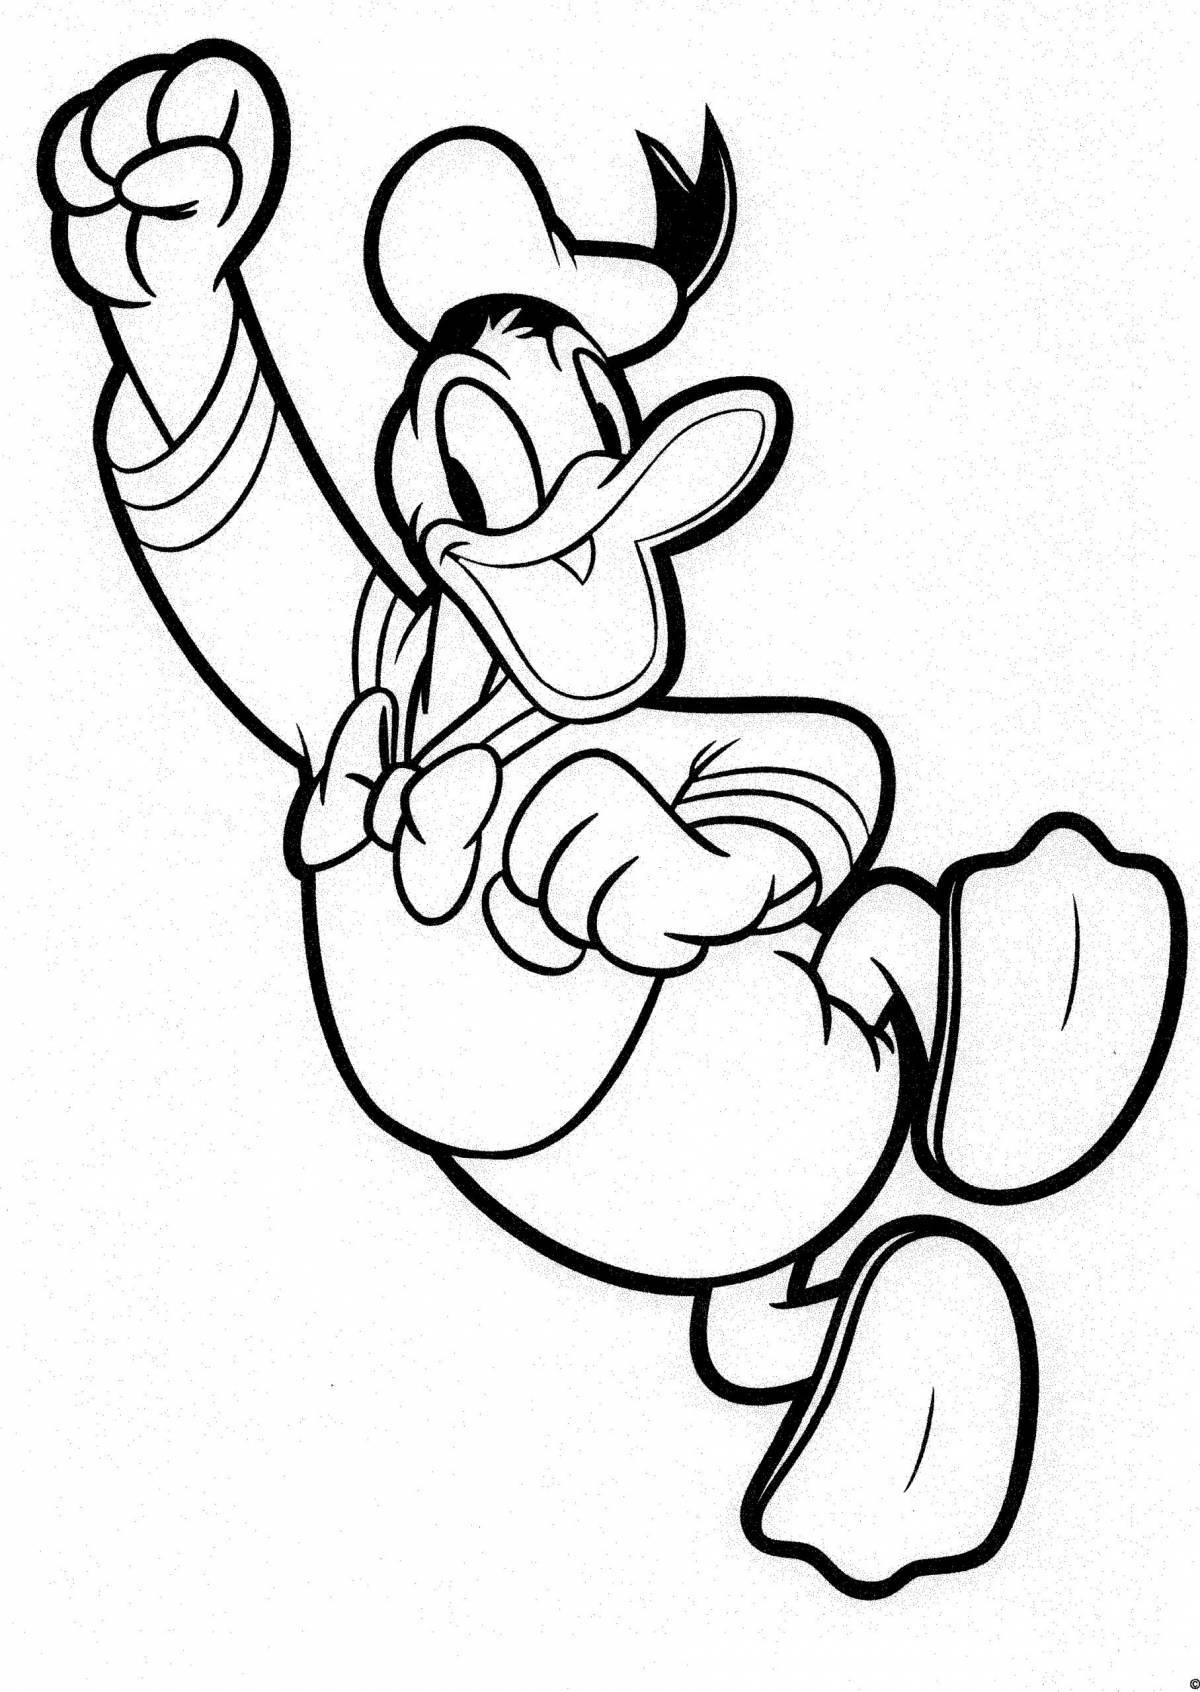 Delightful donald duck with money